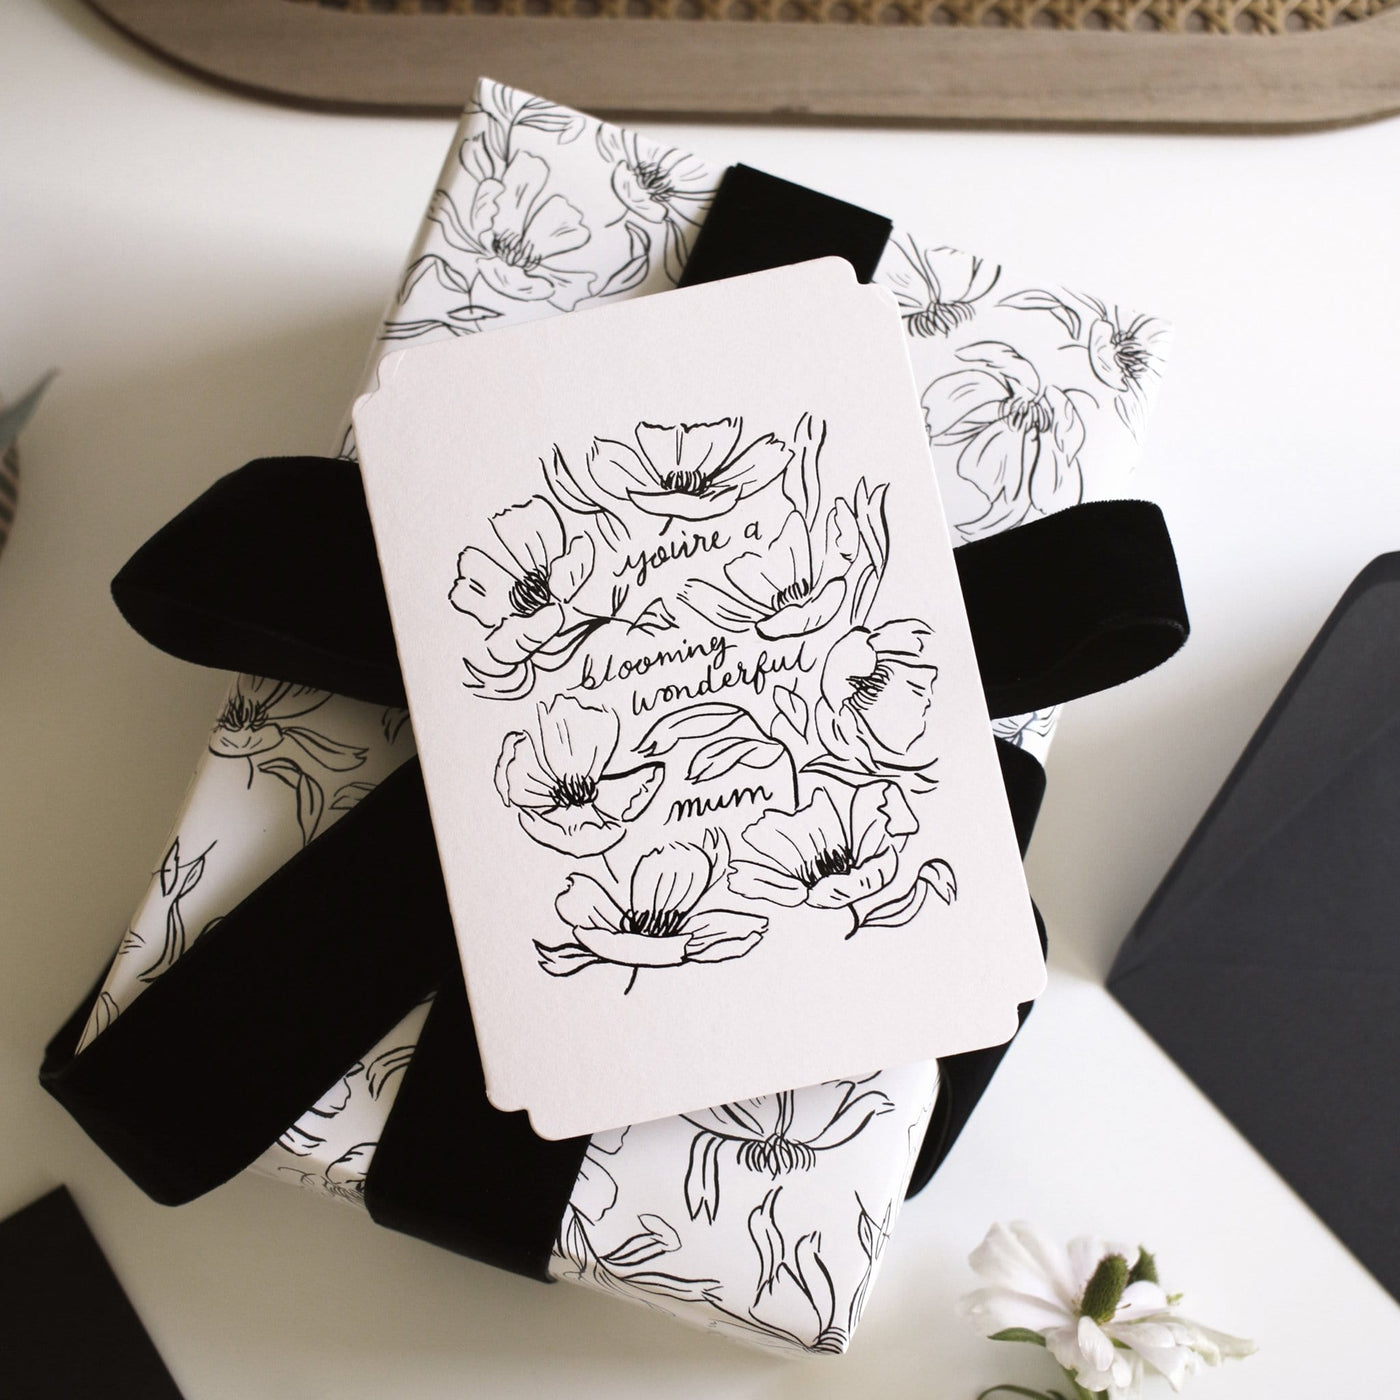 Black Floral Line Art Work A6 White Card  With The Words You're Blooming Wonderful Mum Coupled With A Black Envelope - Annie Dornan Smith